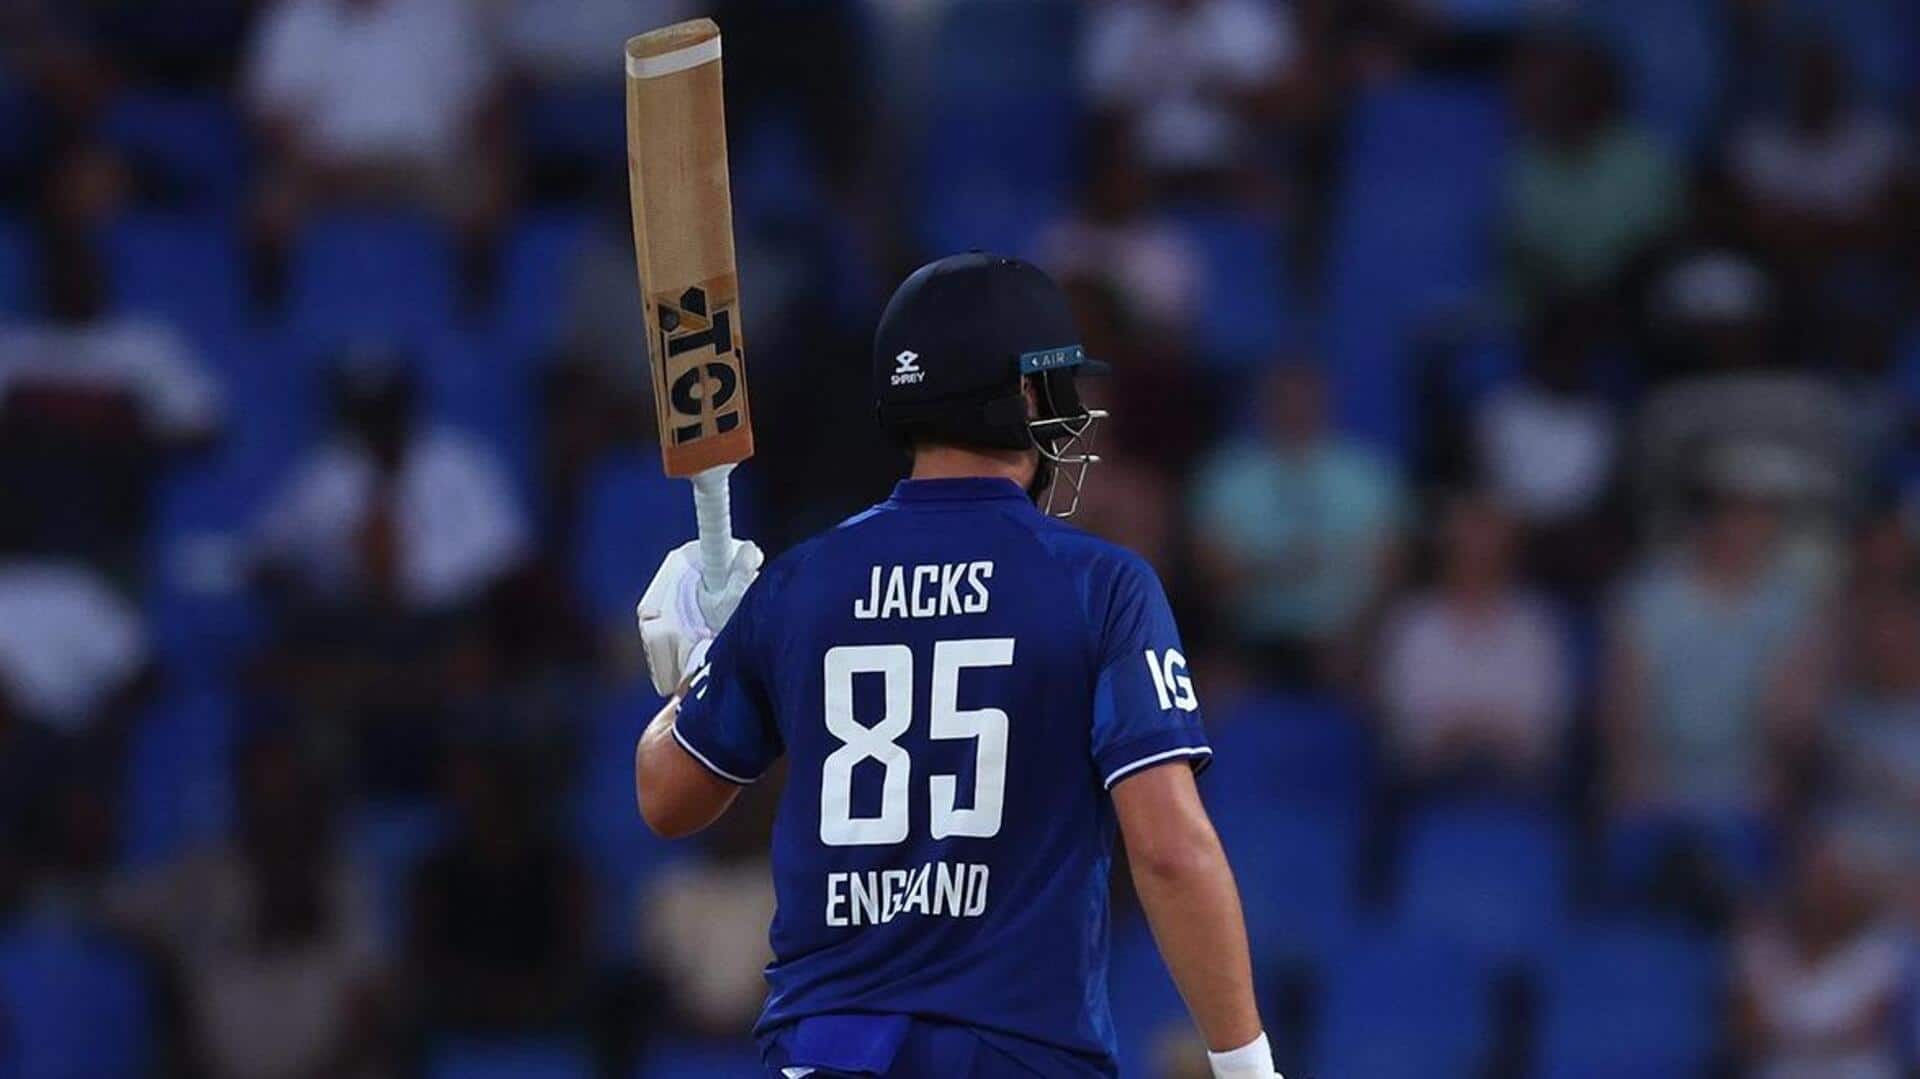 WI vs ENG: Will Jacks scores his second ODI fifty